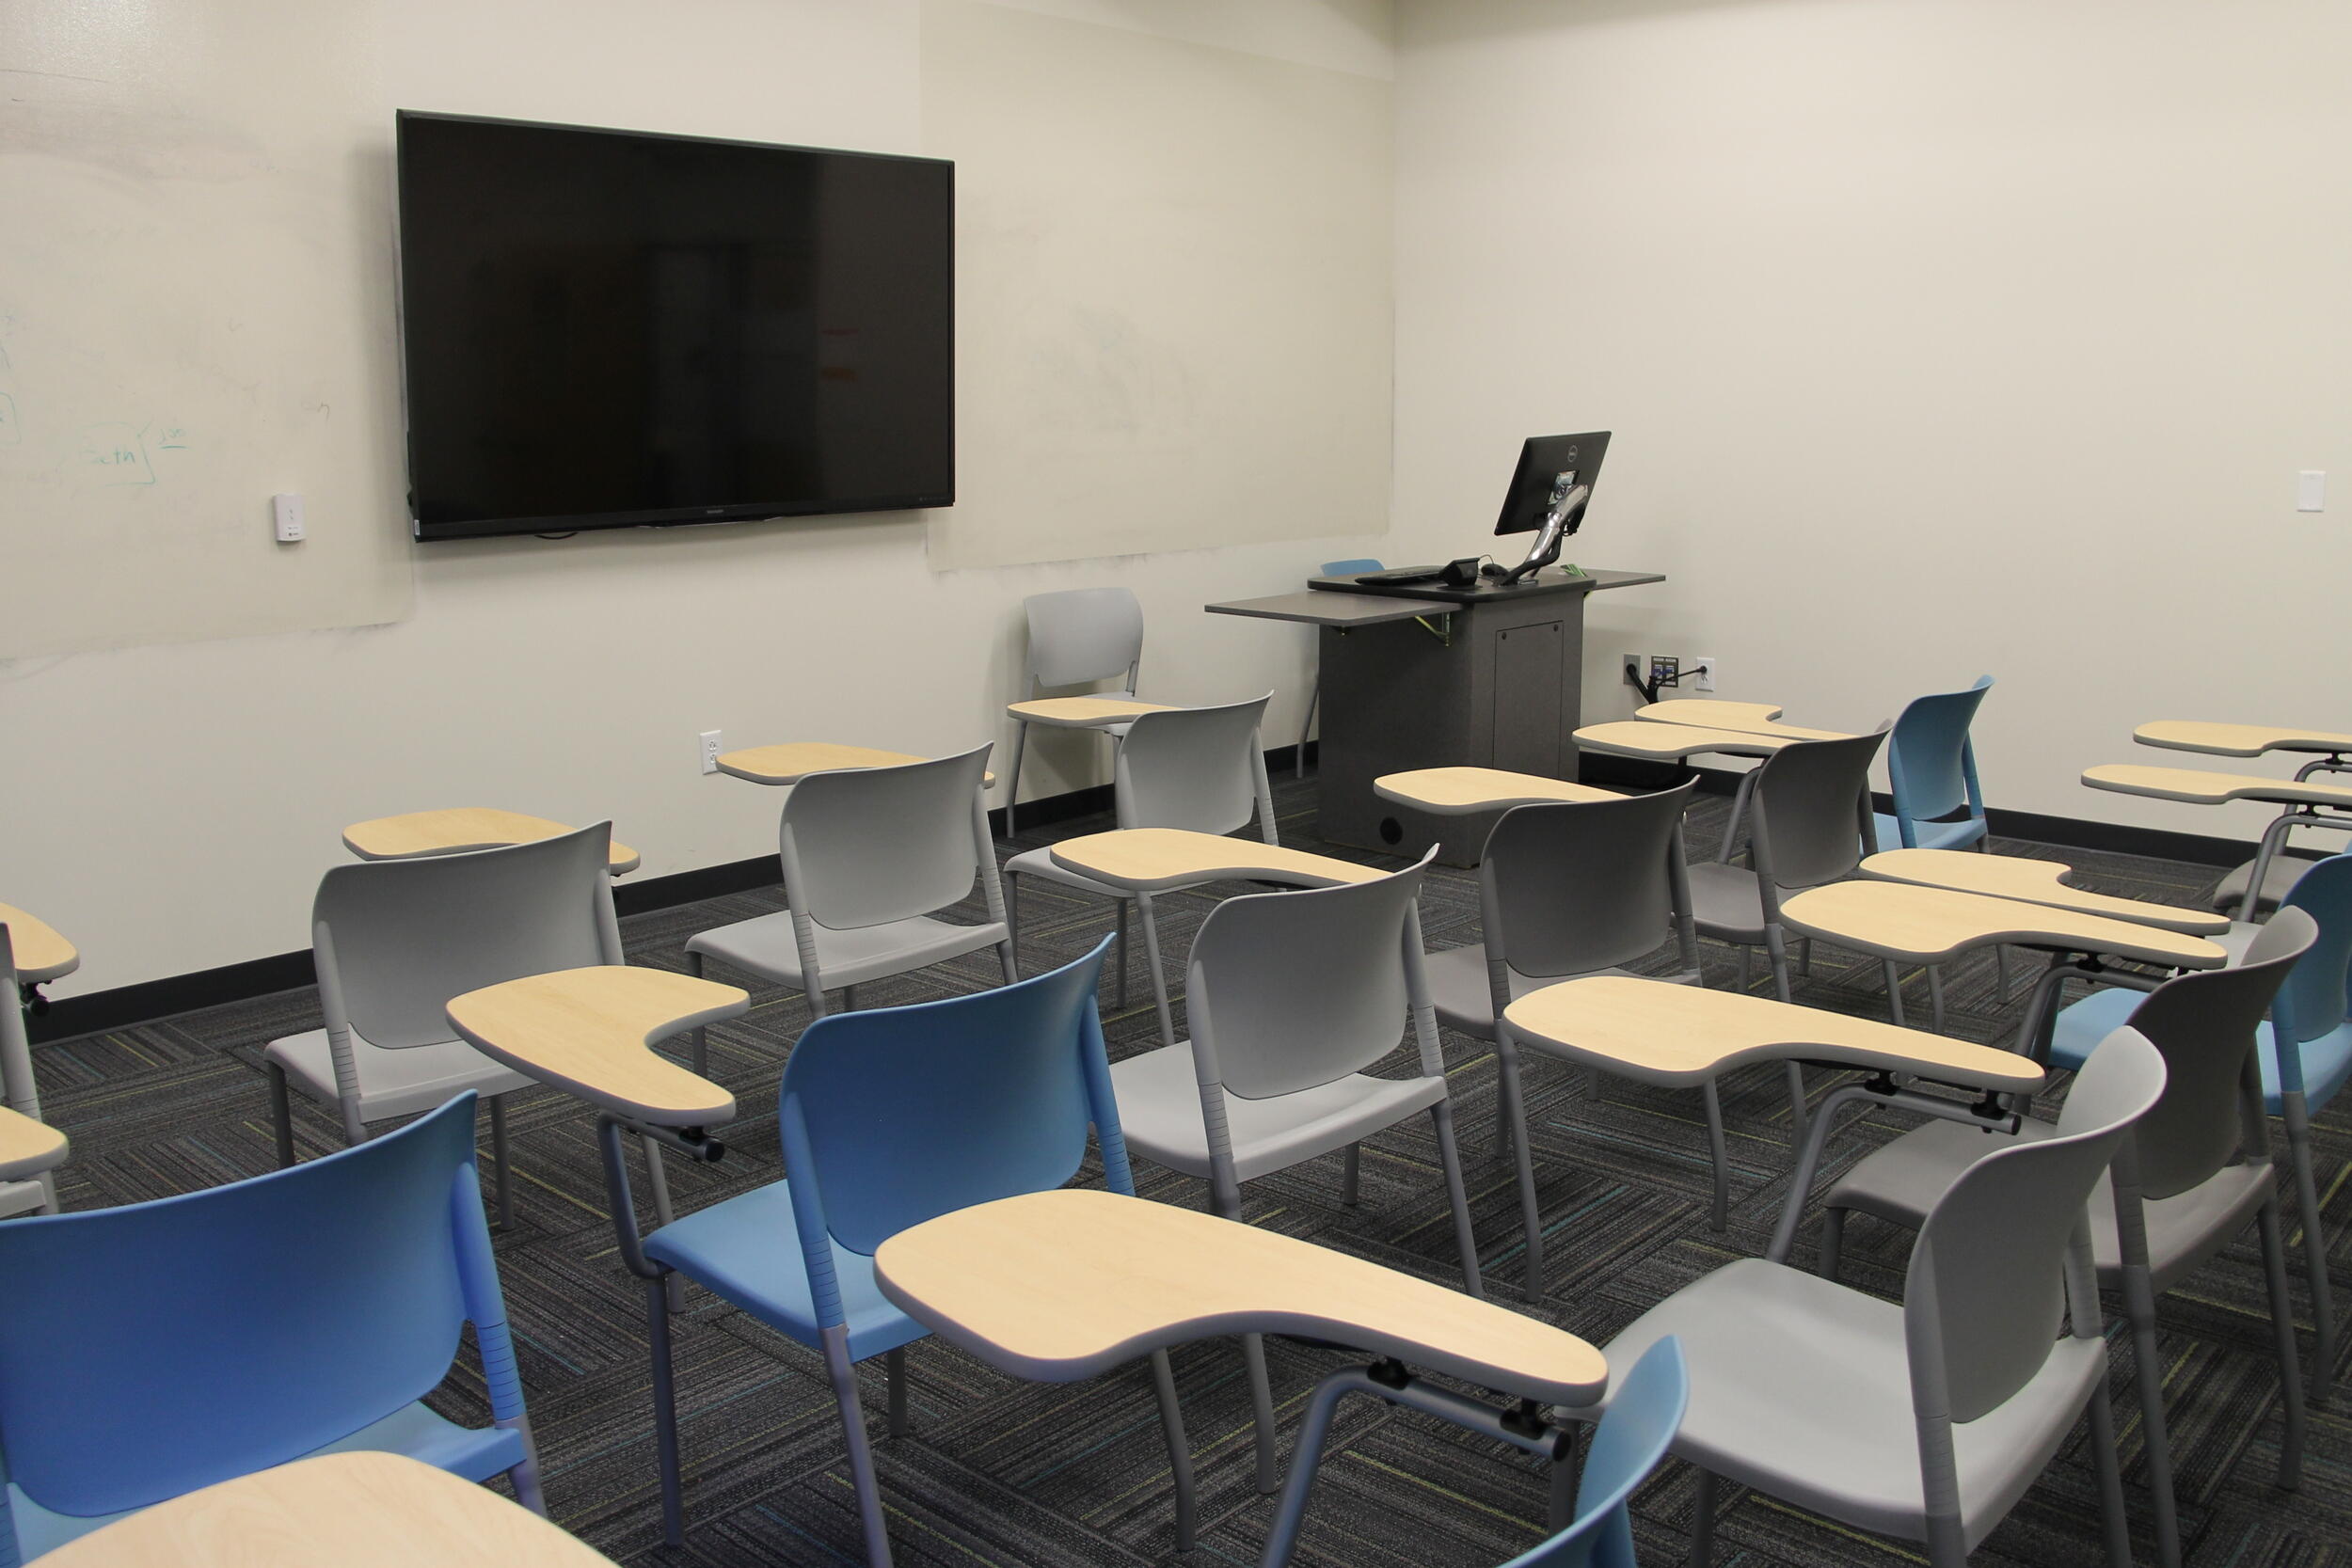 An empty classroom with desks facing a wall with a flatscreen TV on it 